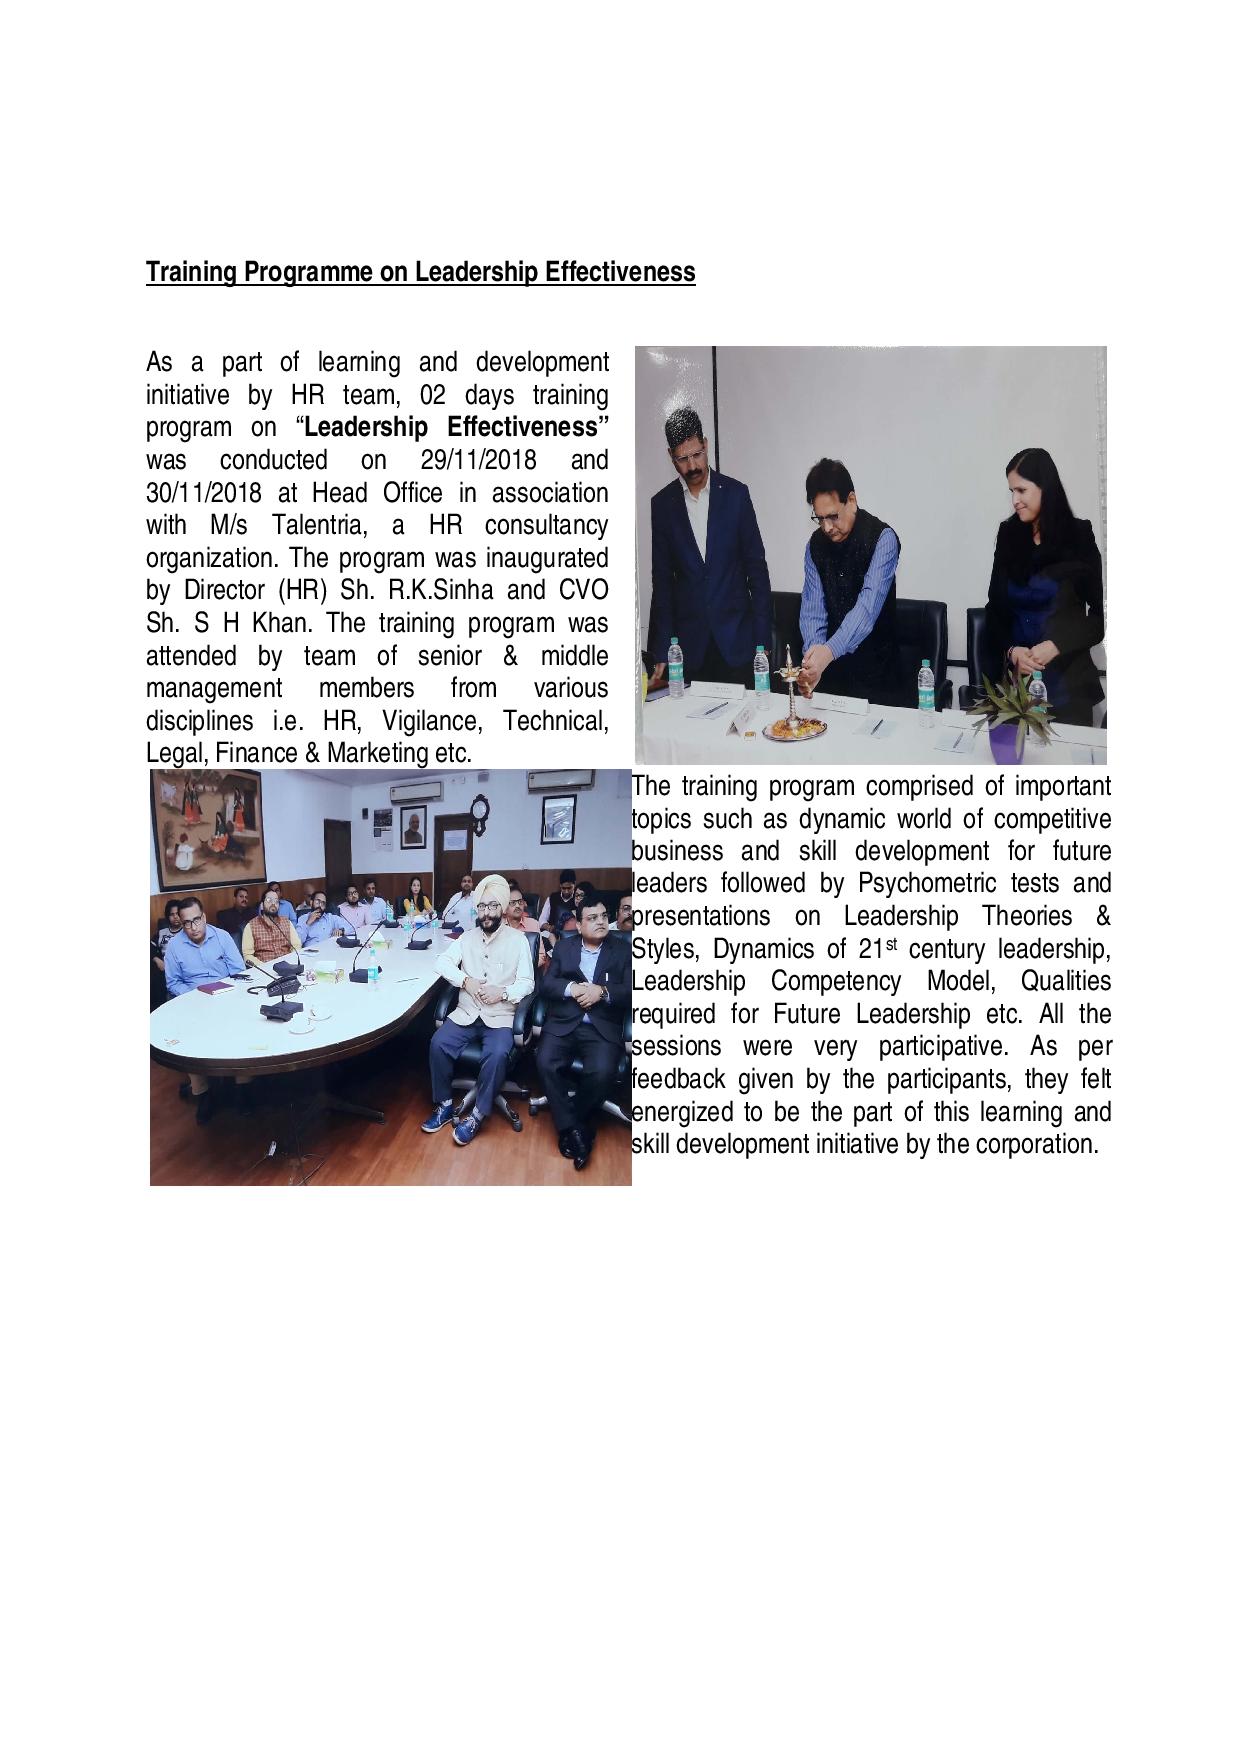 As a part of Training Programmes organised by HR department, a training programme was conducted on 29.11.2018 & 30.11.2018 at Head Office in association with M/S Talentria, a HR consultancy organisation, on the topic "Leadership Effectiveness".